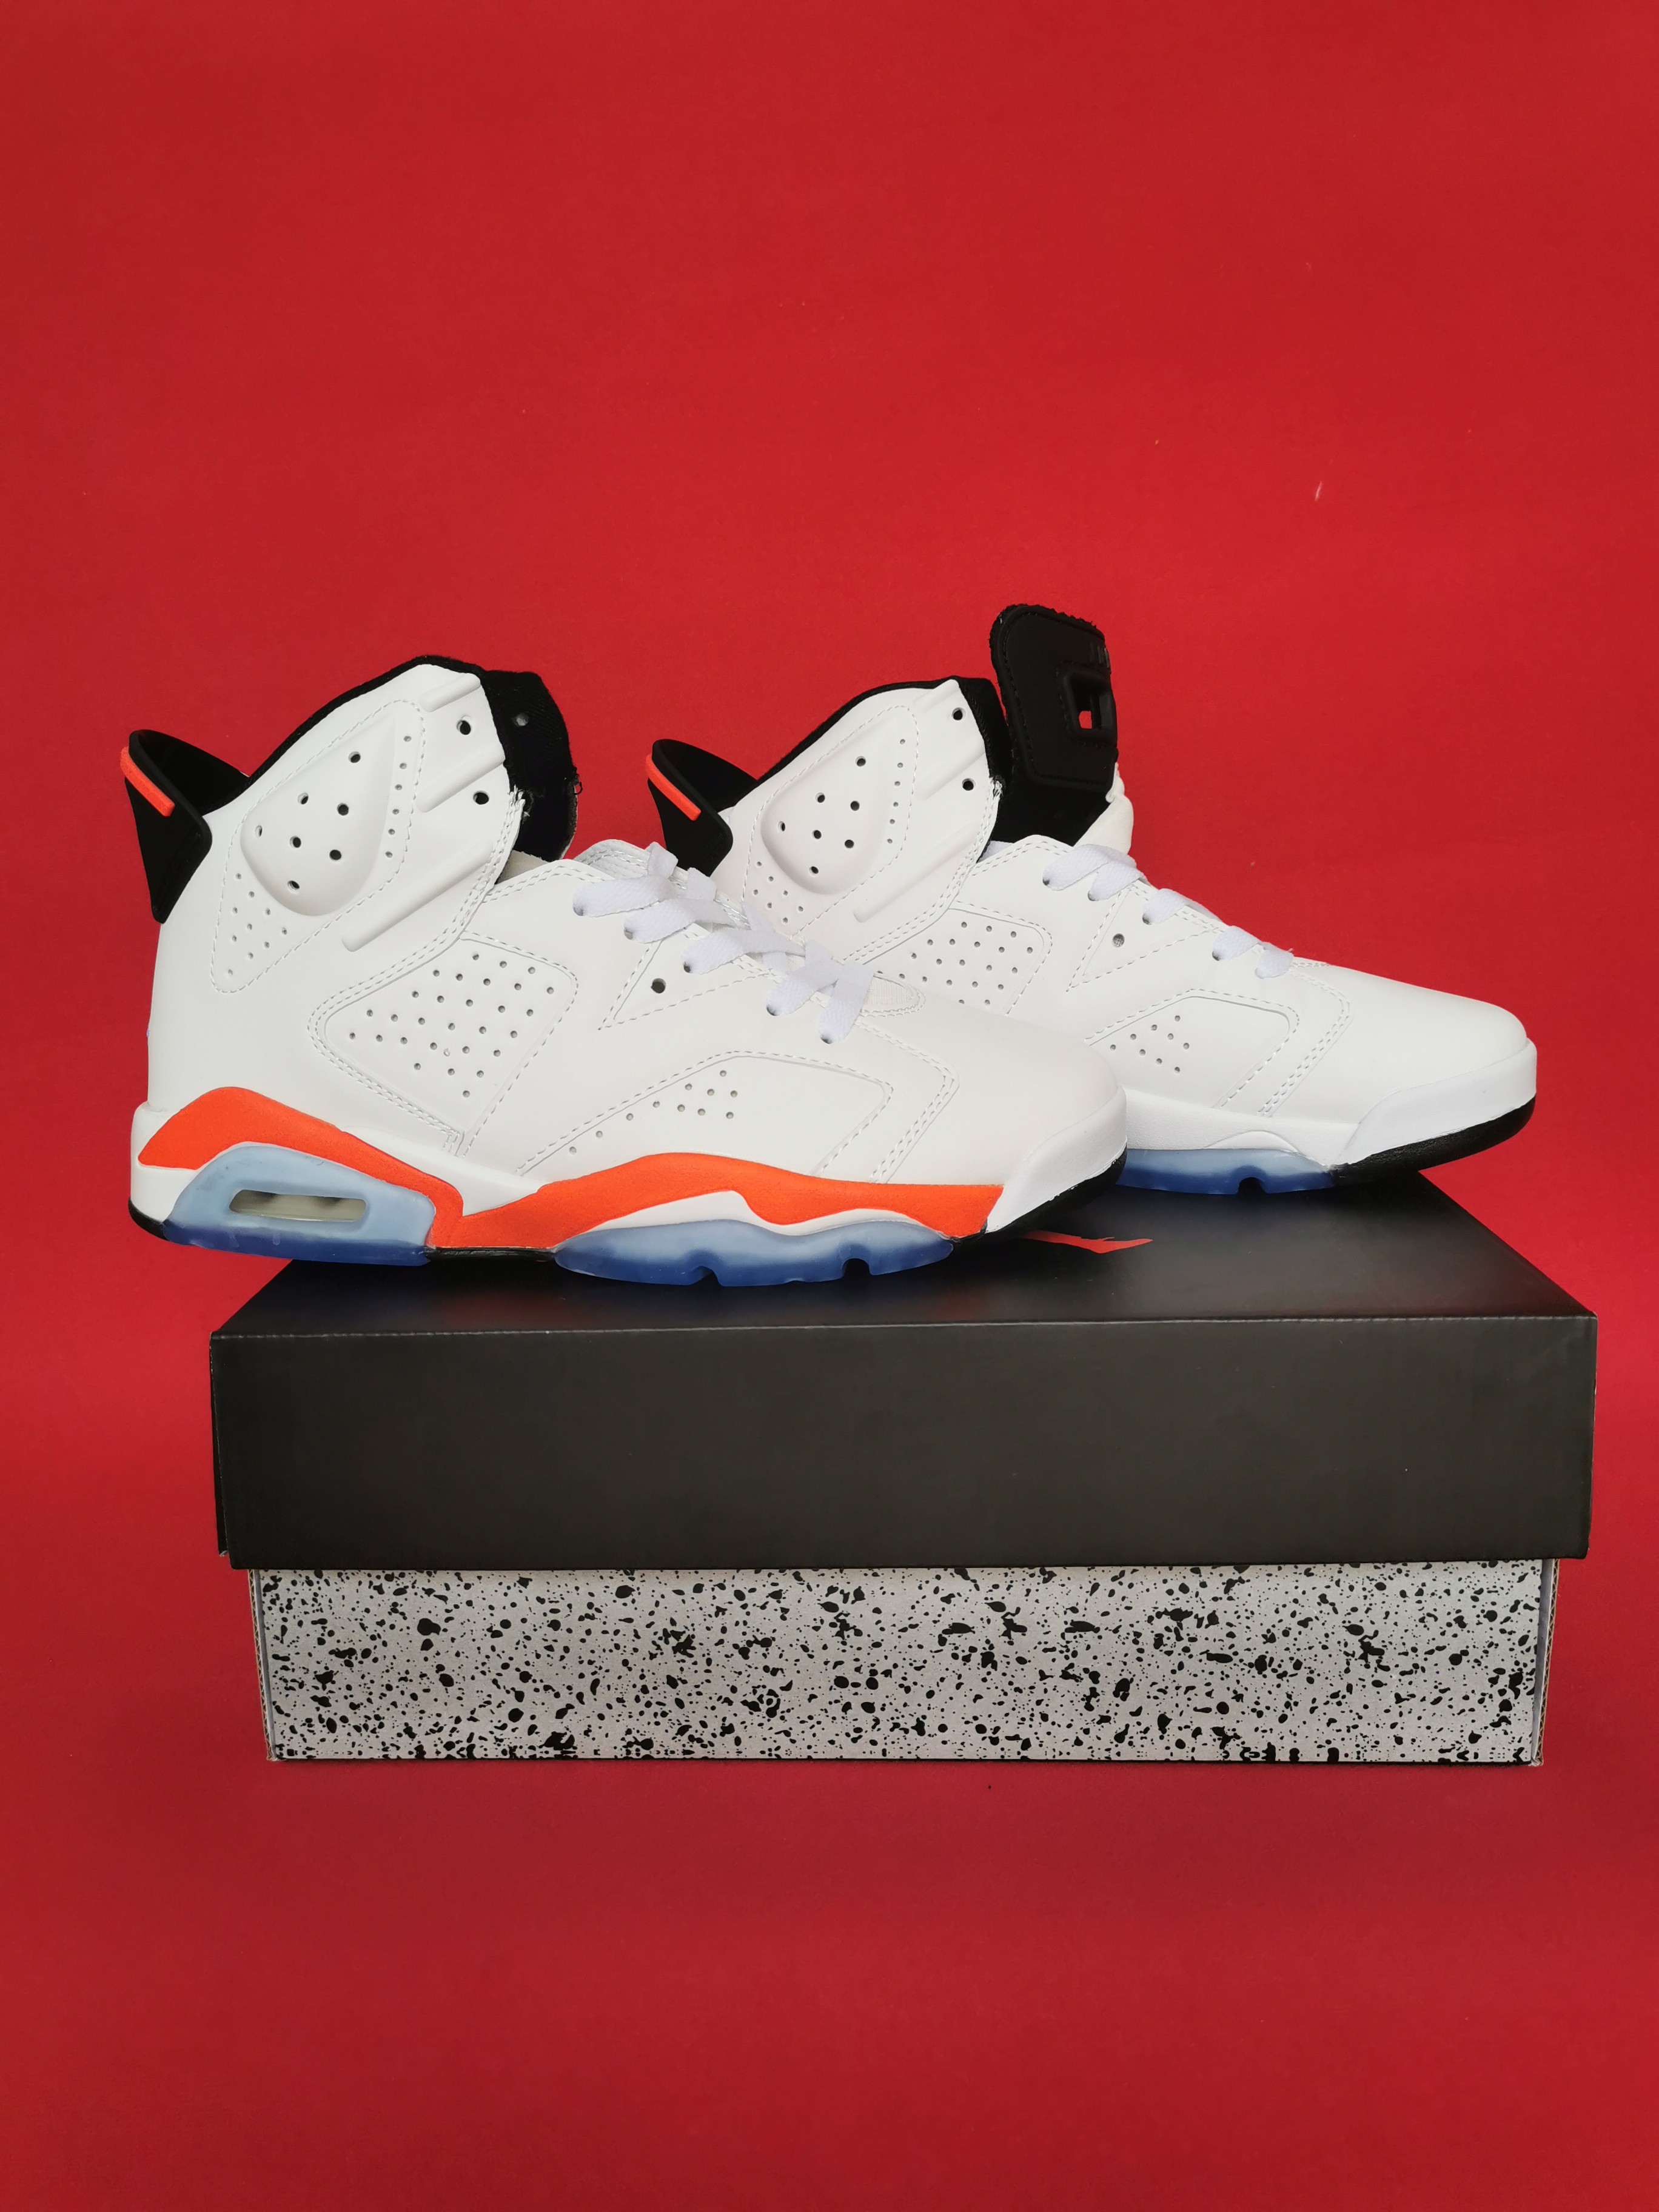 Air Jordan 6 OG White Red Ice Sole Shoes